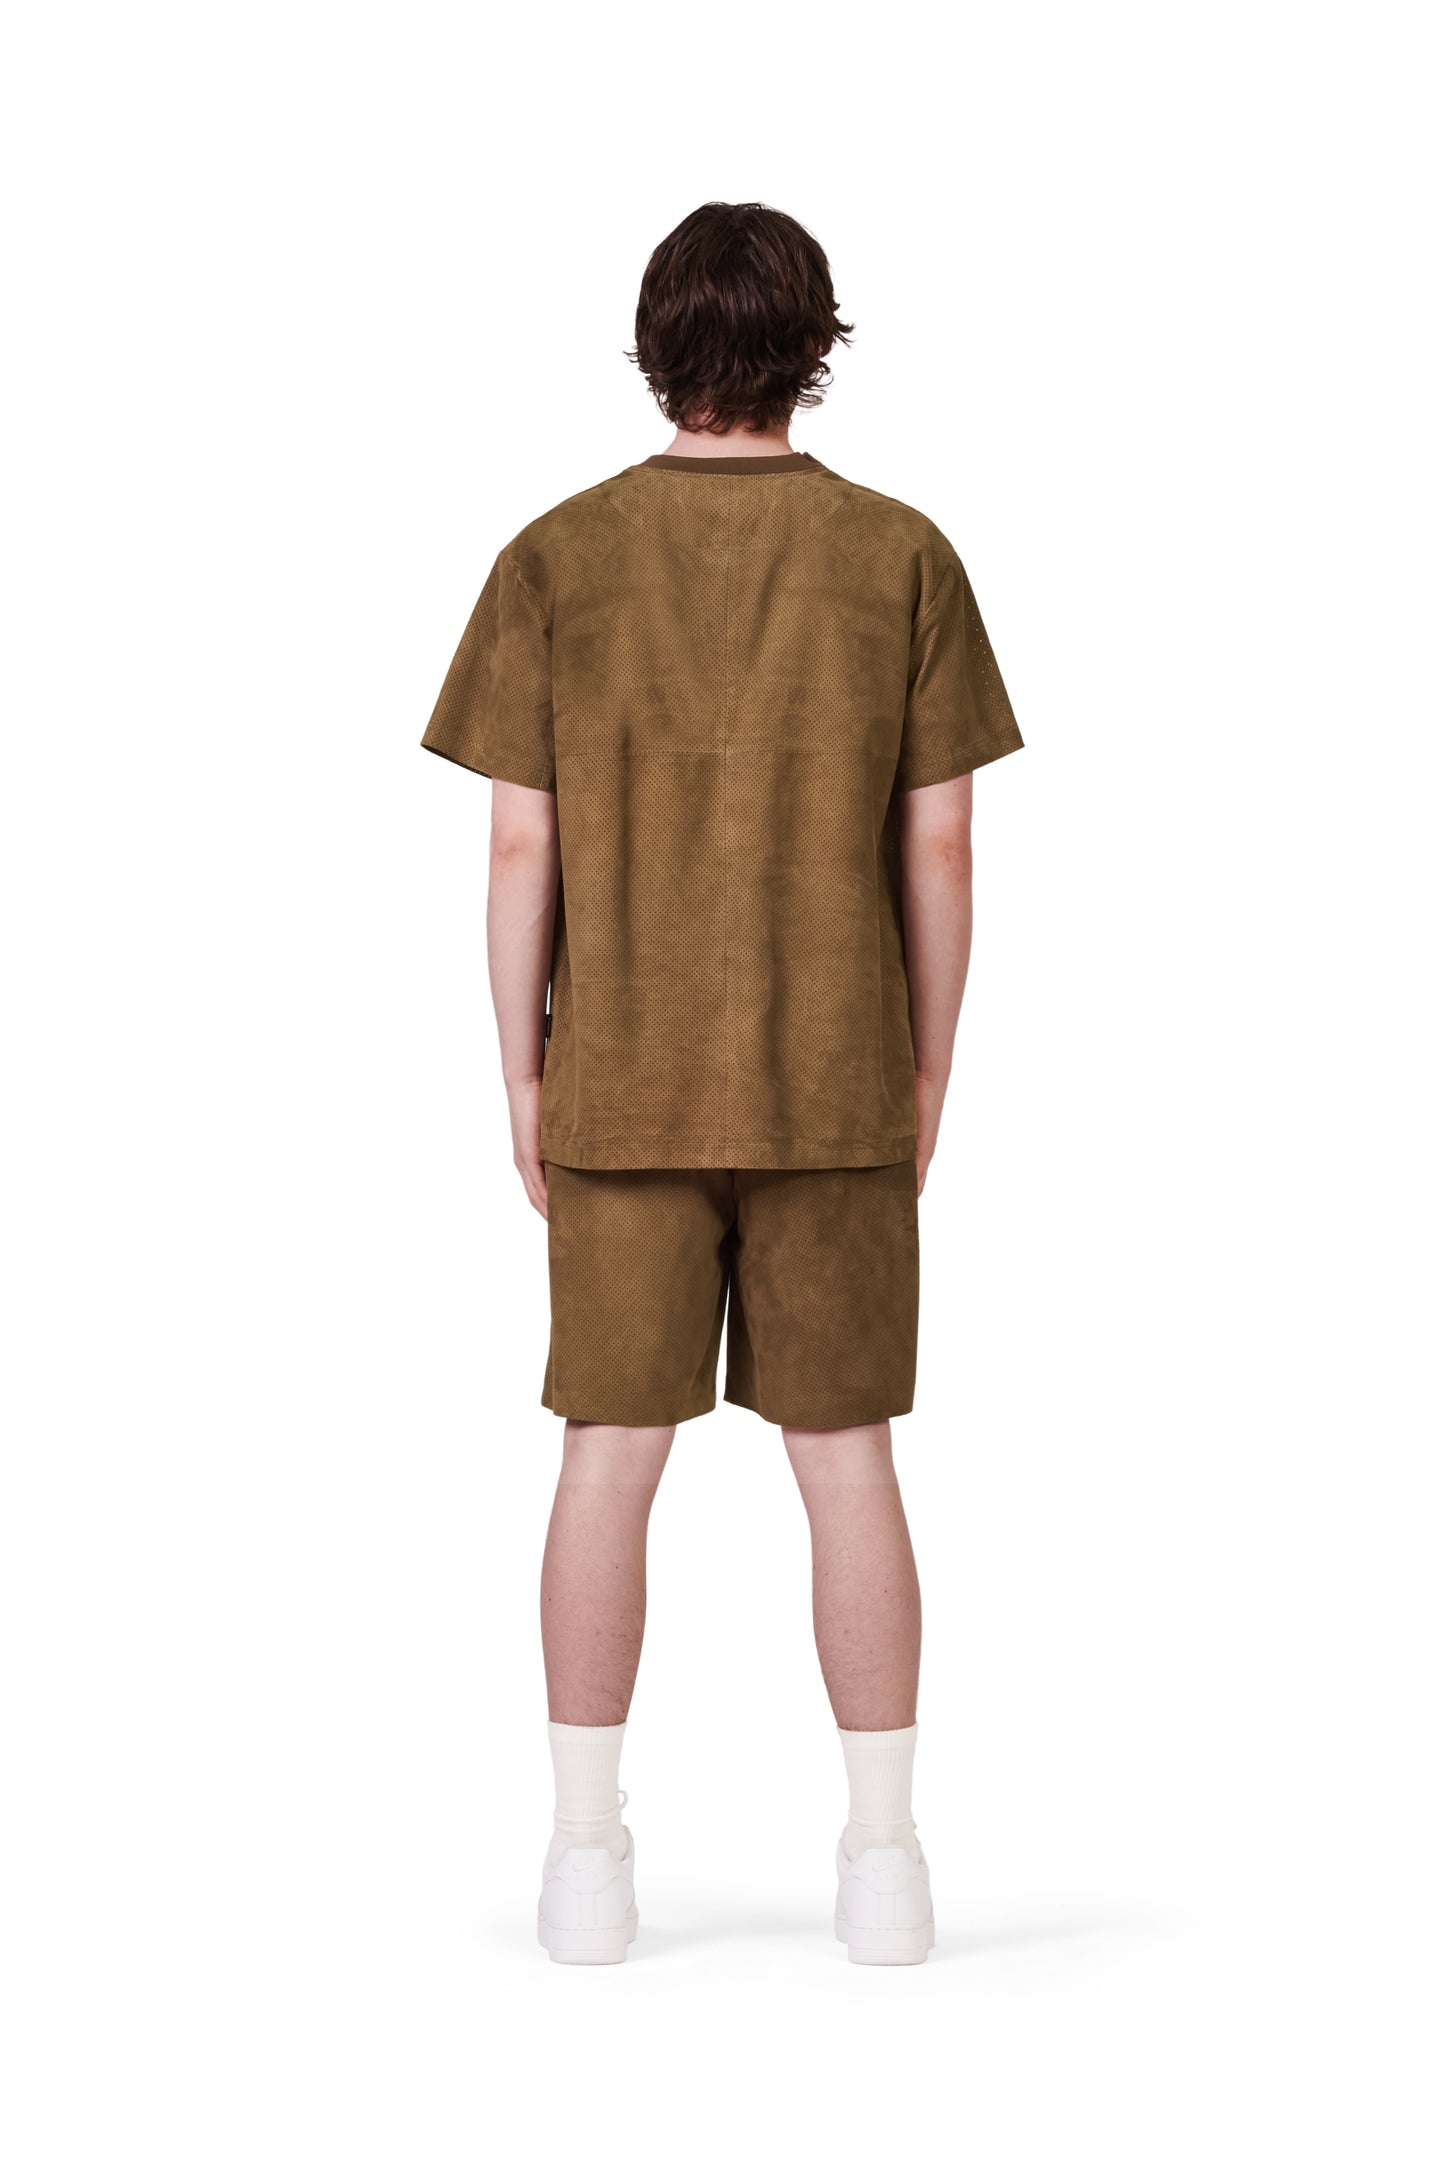 P328 REGULAR FIT T-SHIRT - Perforated Brown Suede